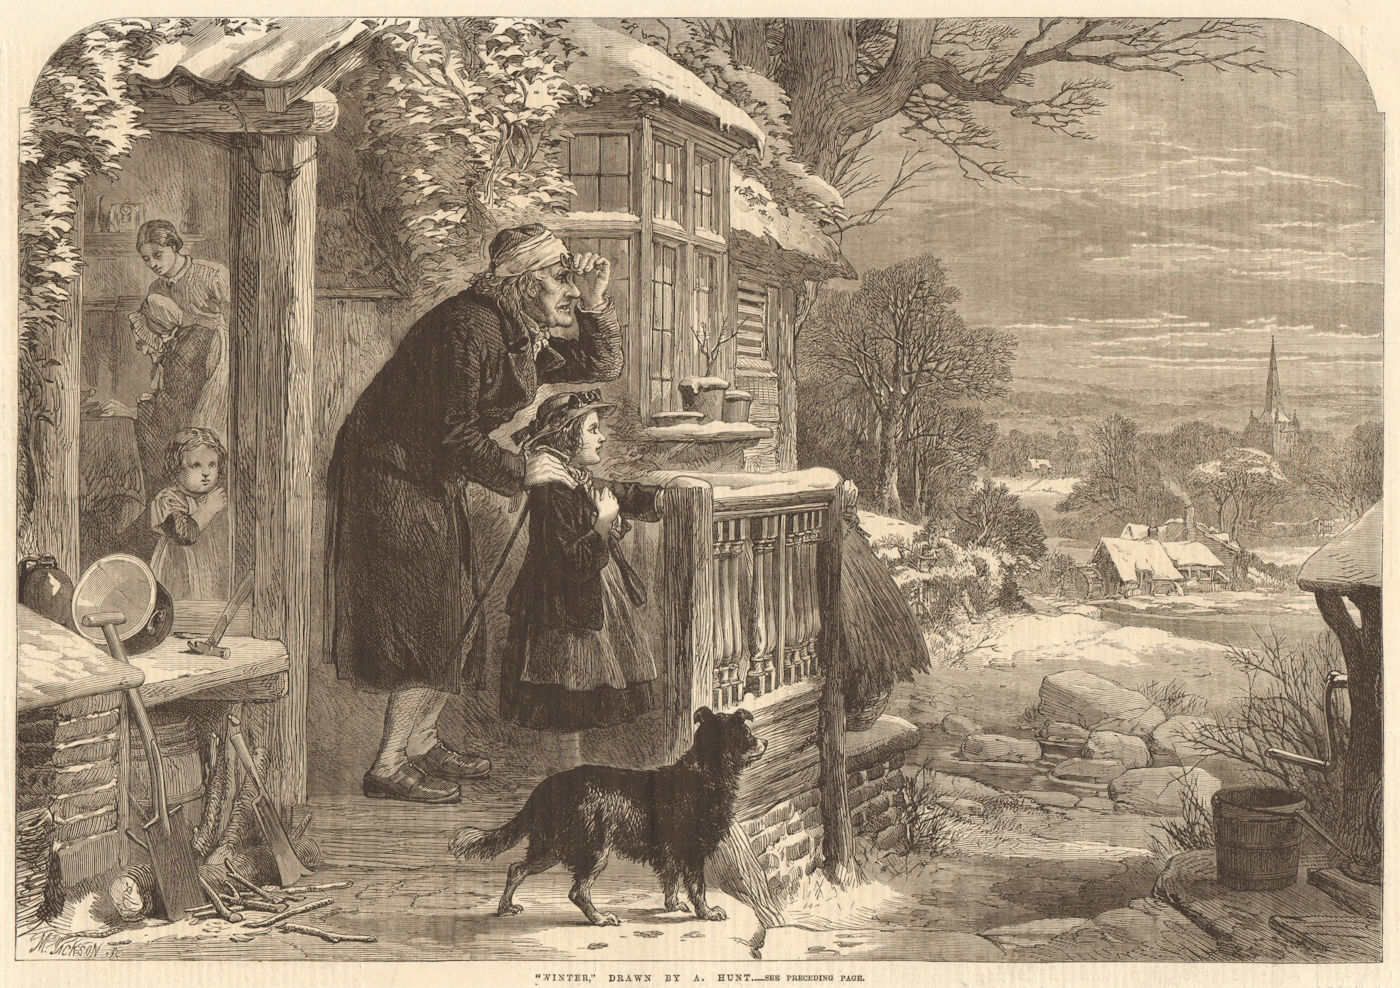 Associate Product "Winter" drawn by A. Hunt. Family. Fine Arts 1864 antique ILN full page print